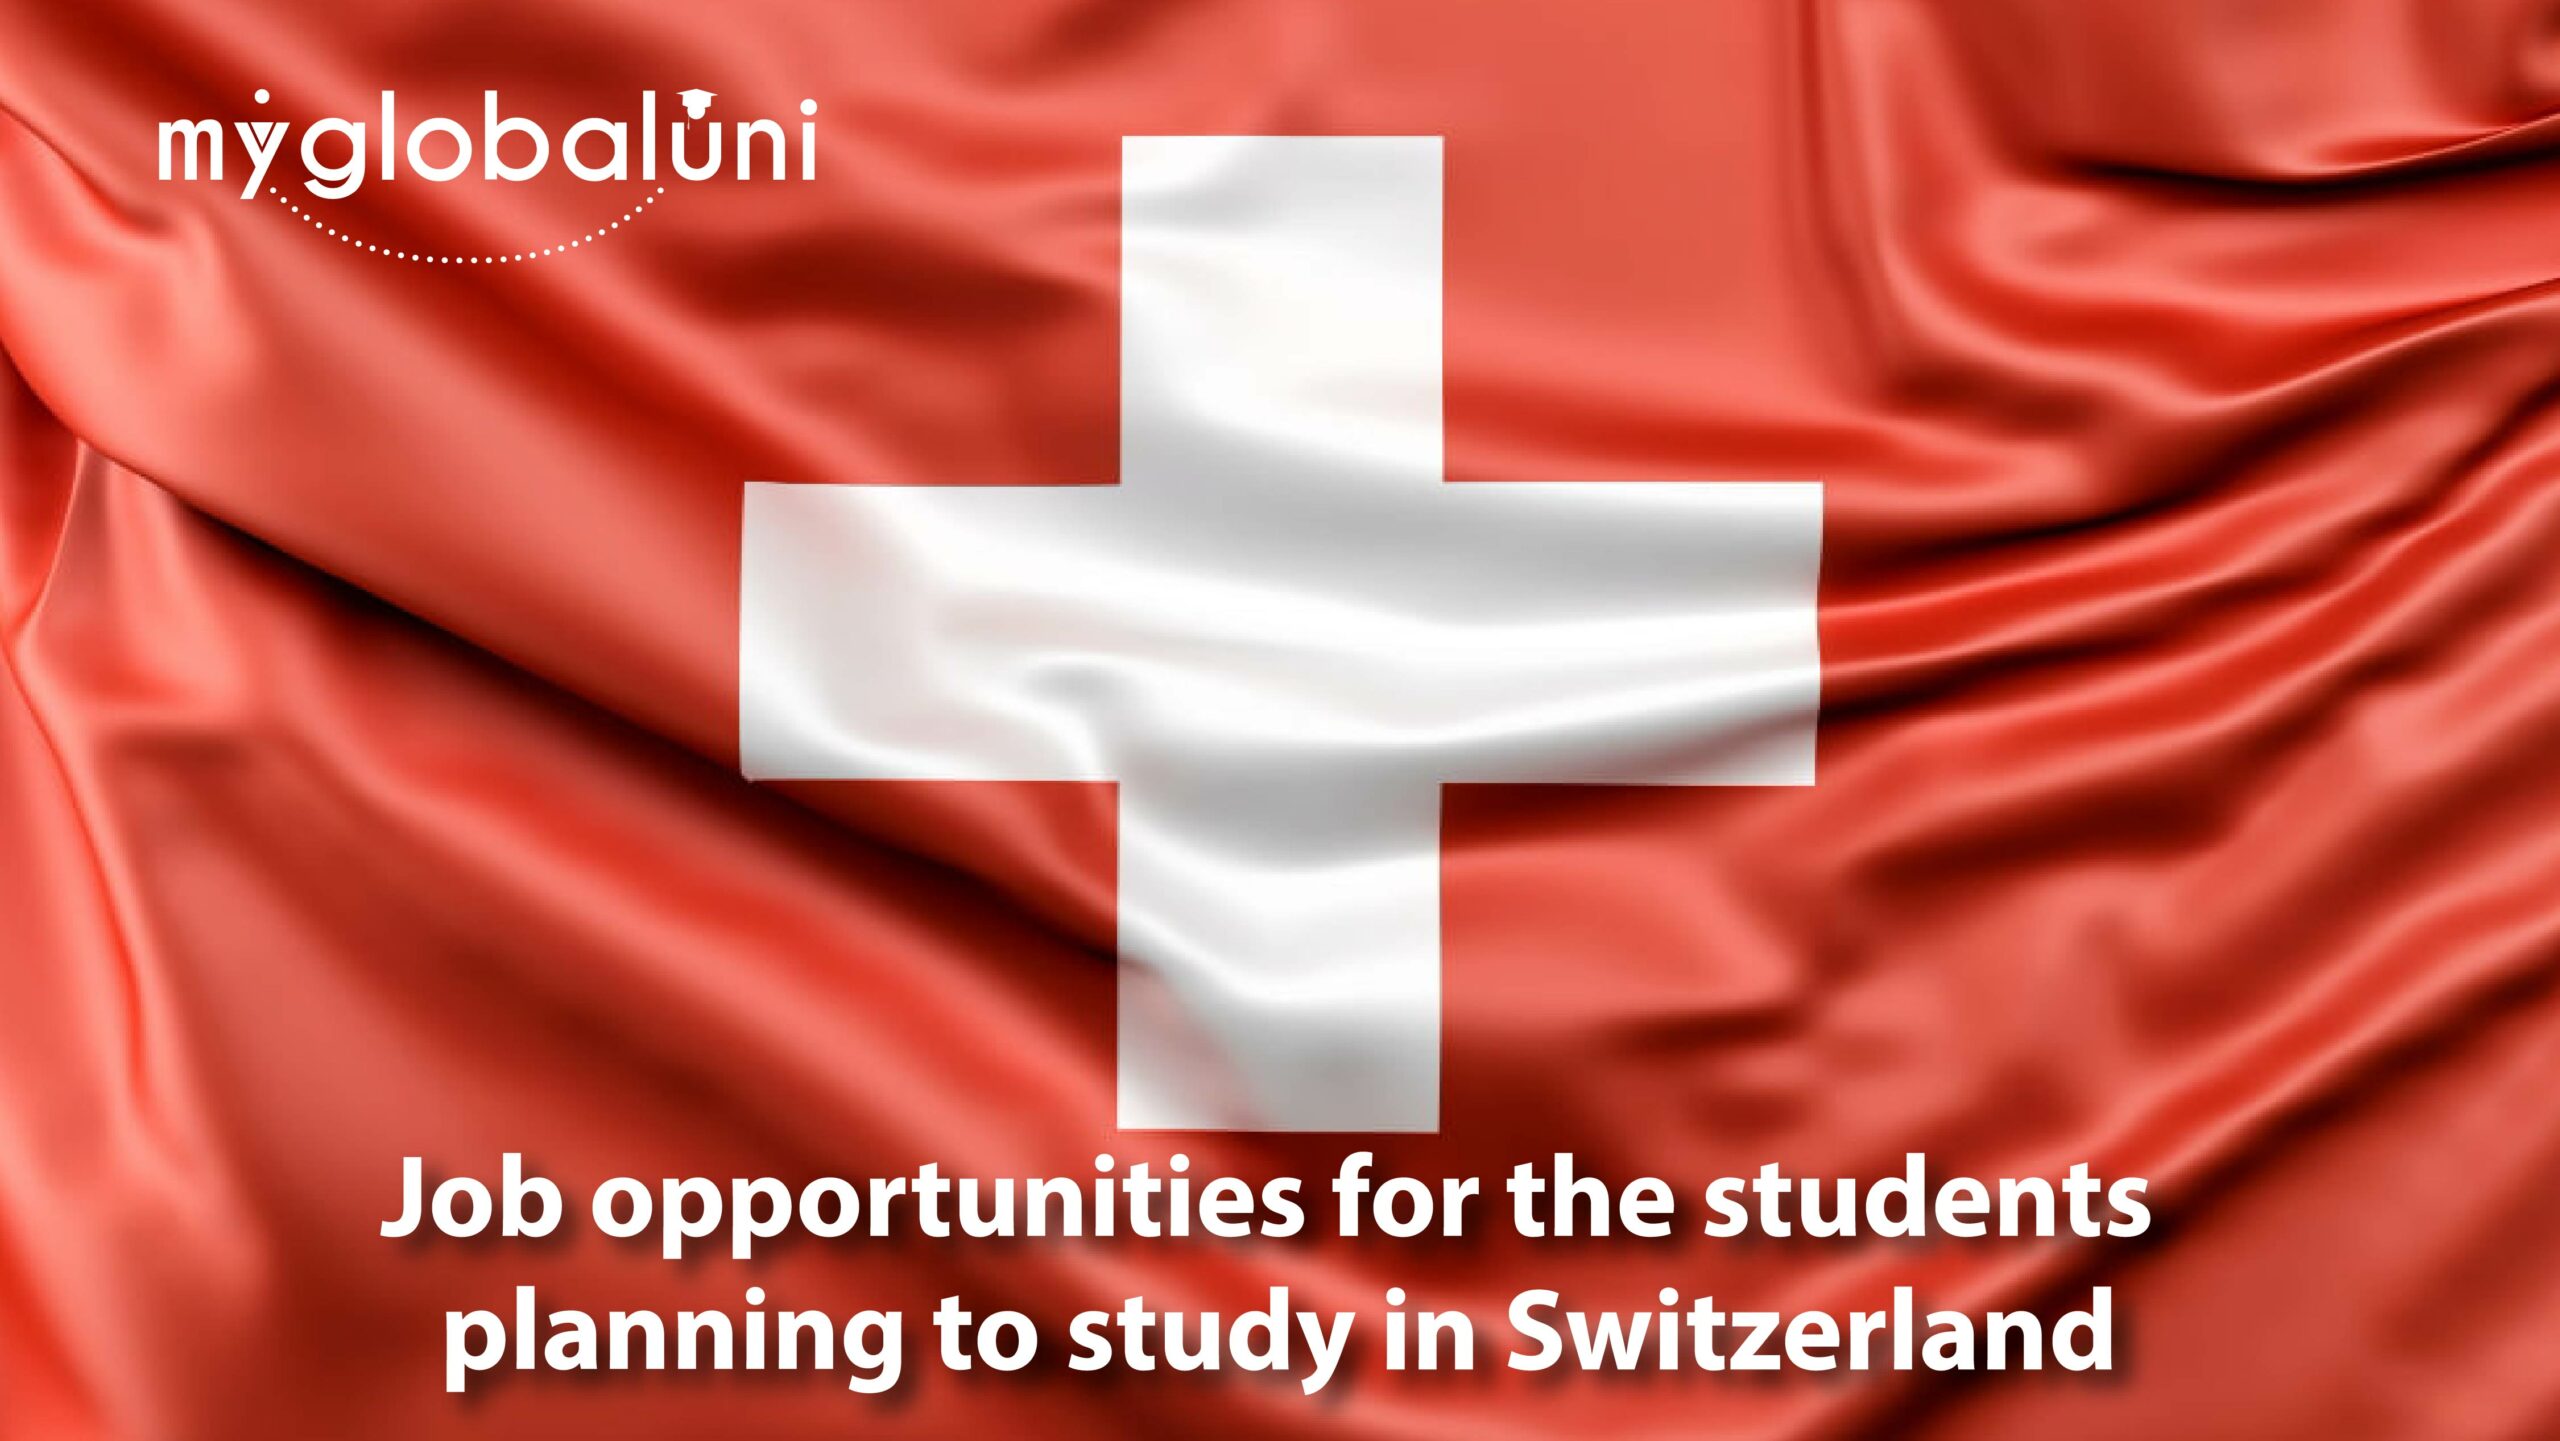 Job opportunities for students planning to study in Switzerland